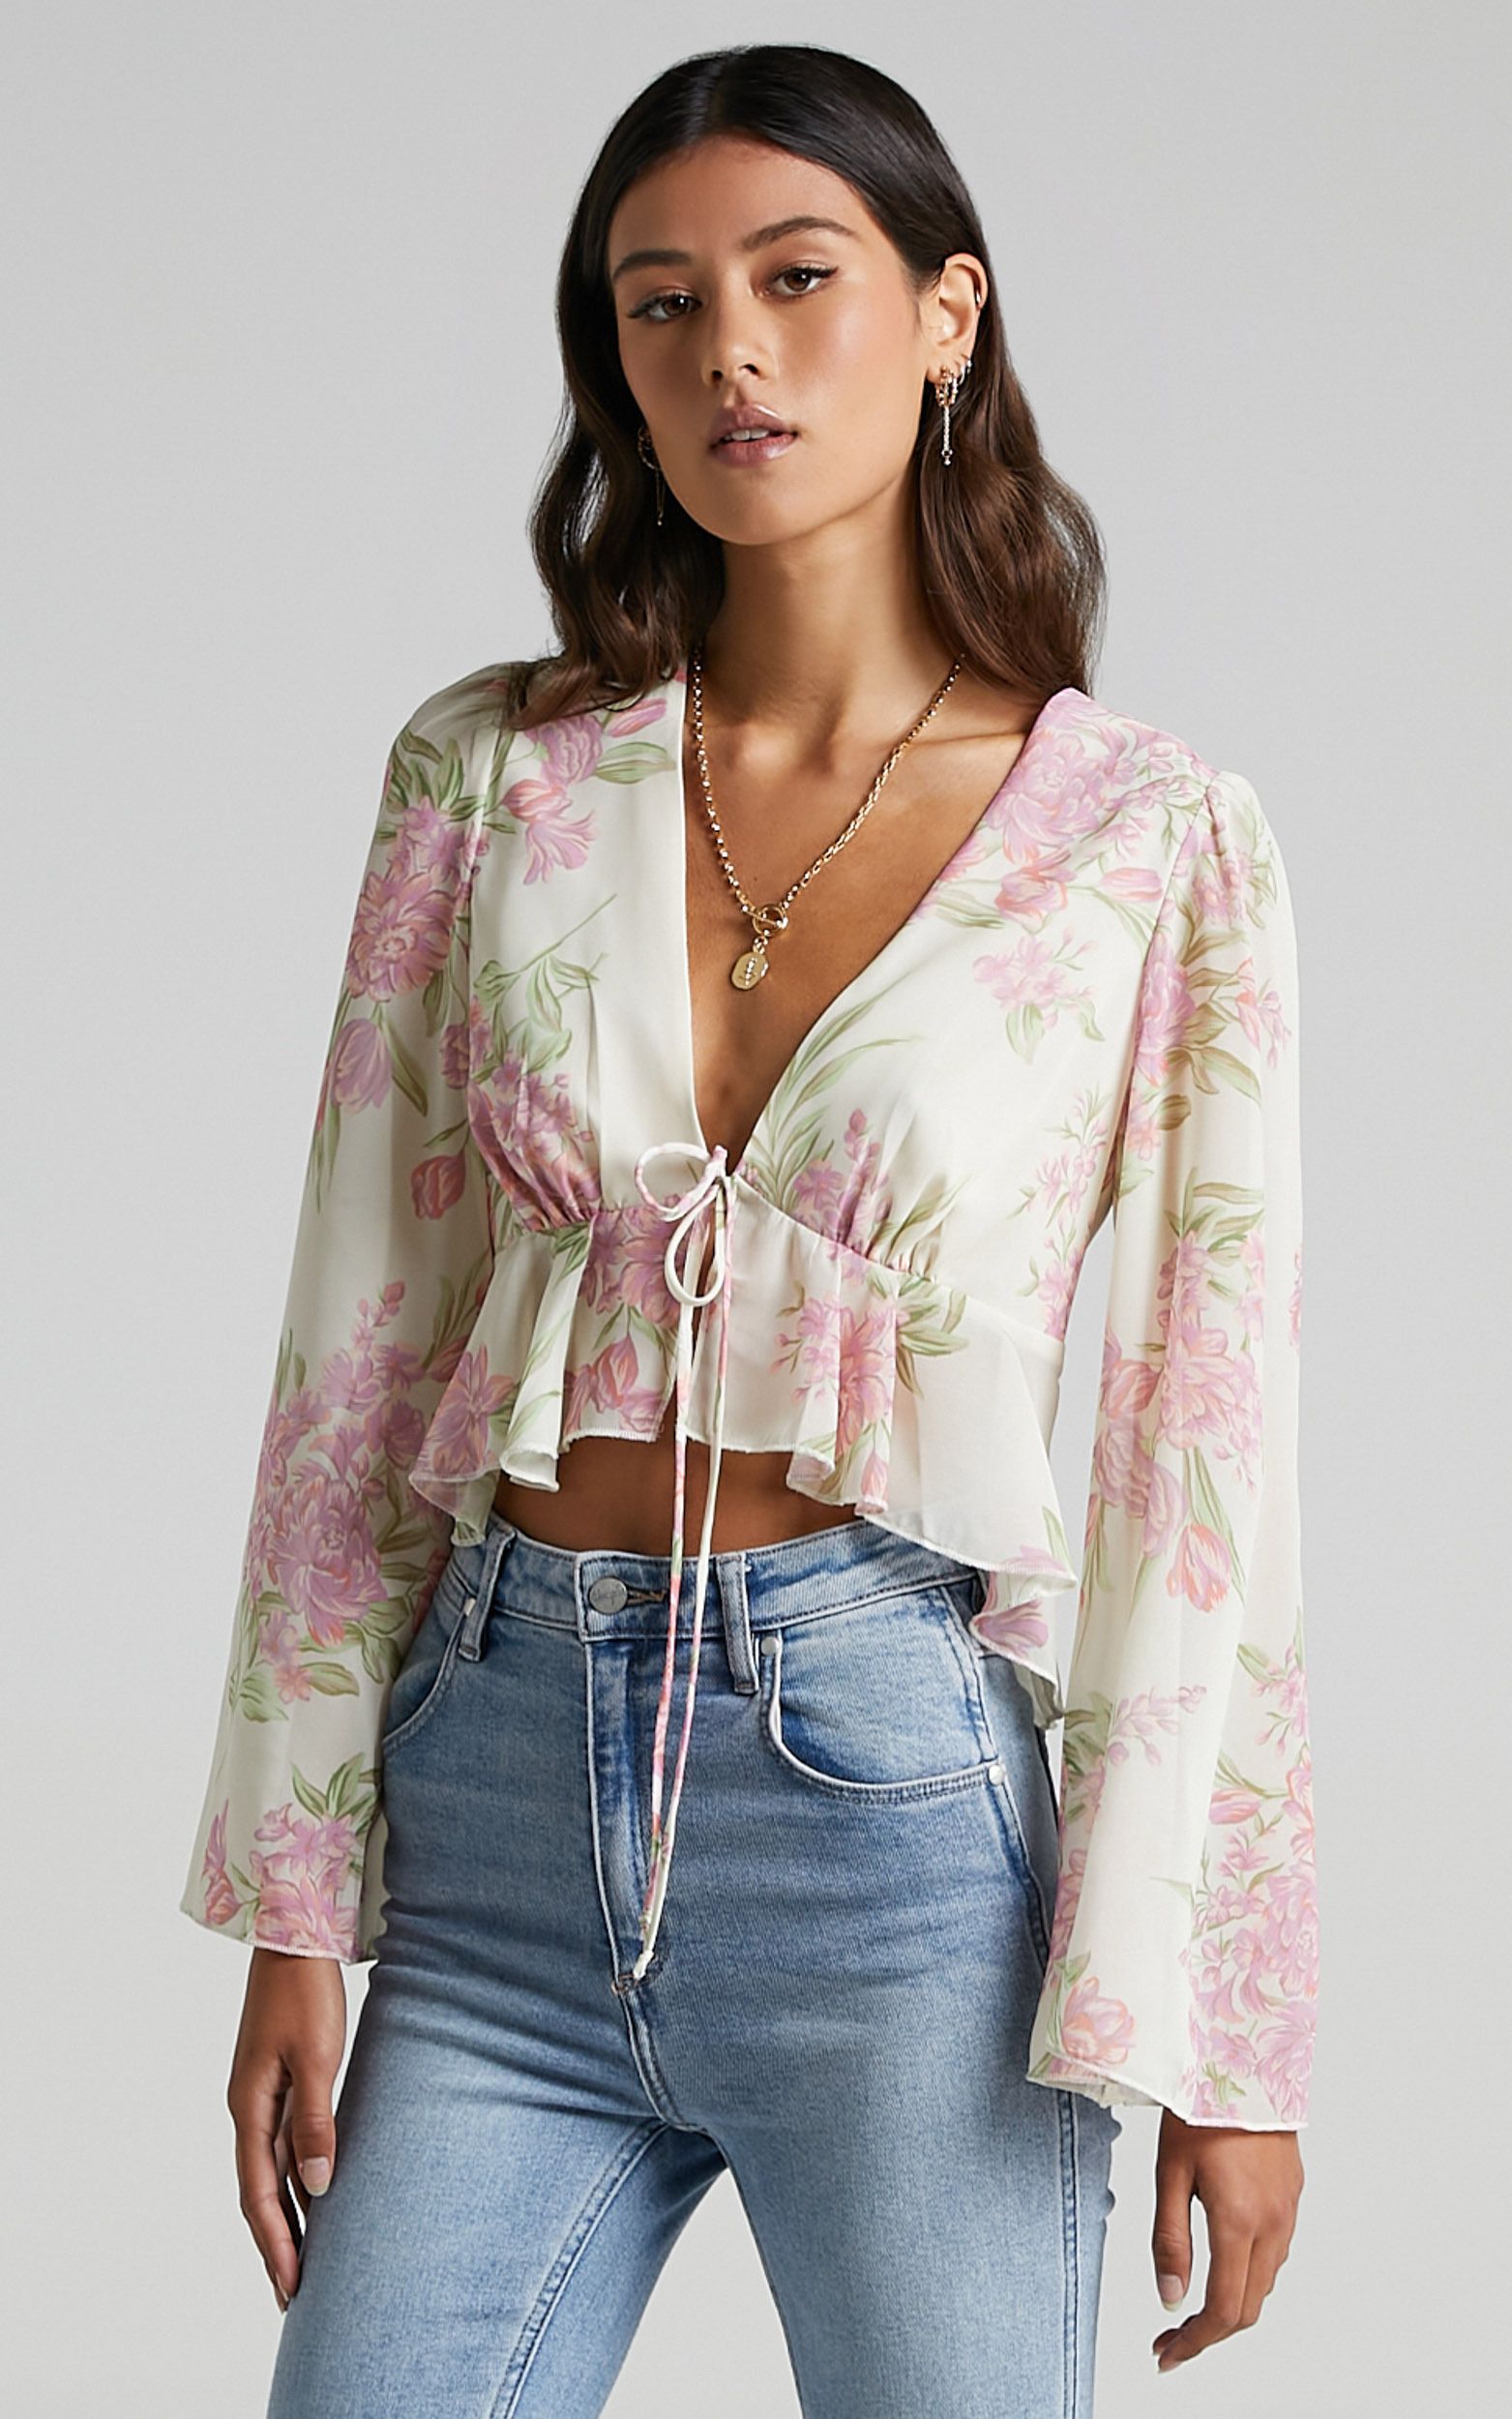 Dance It Out Top in Cream Floral | Showpo - deactived